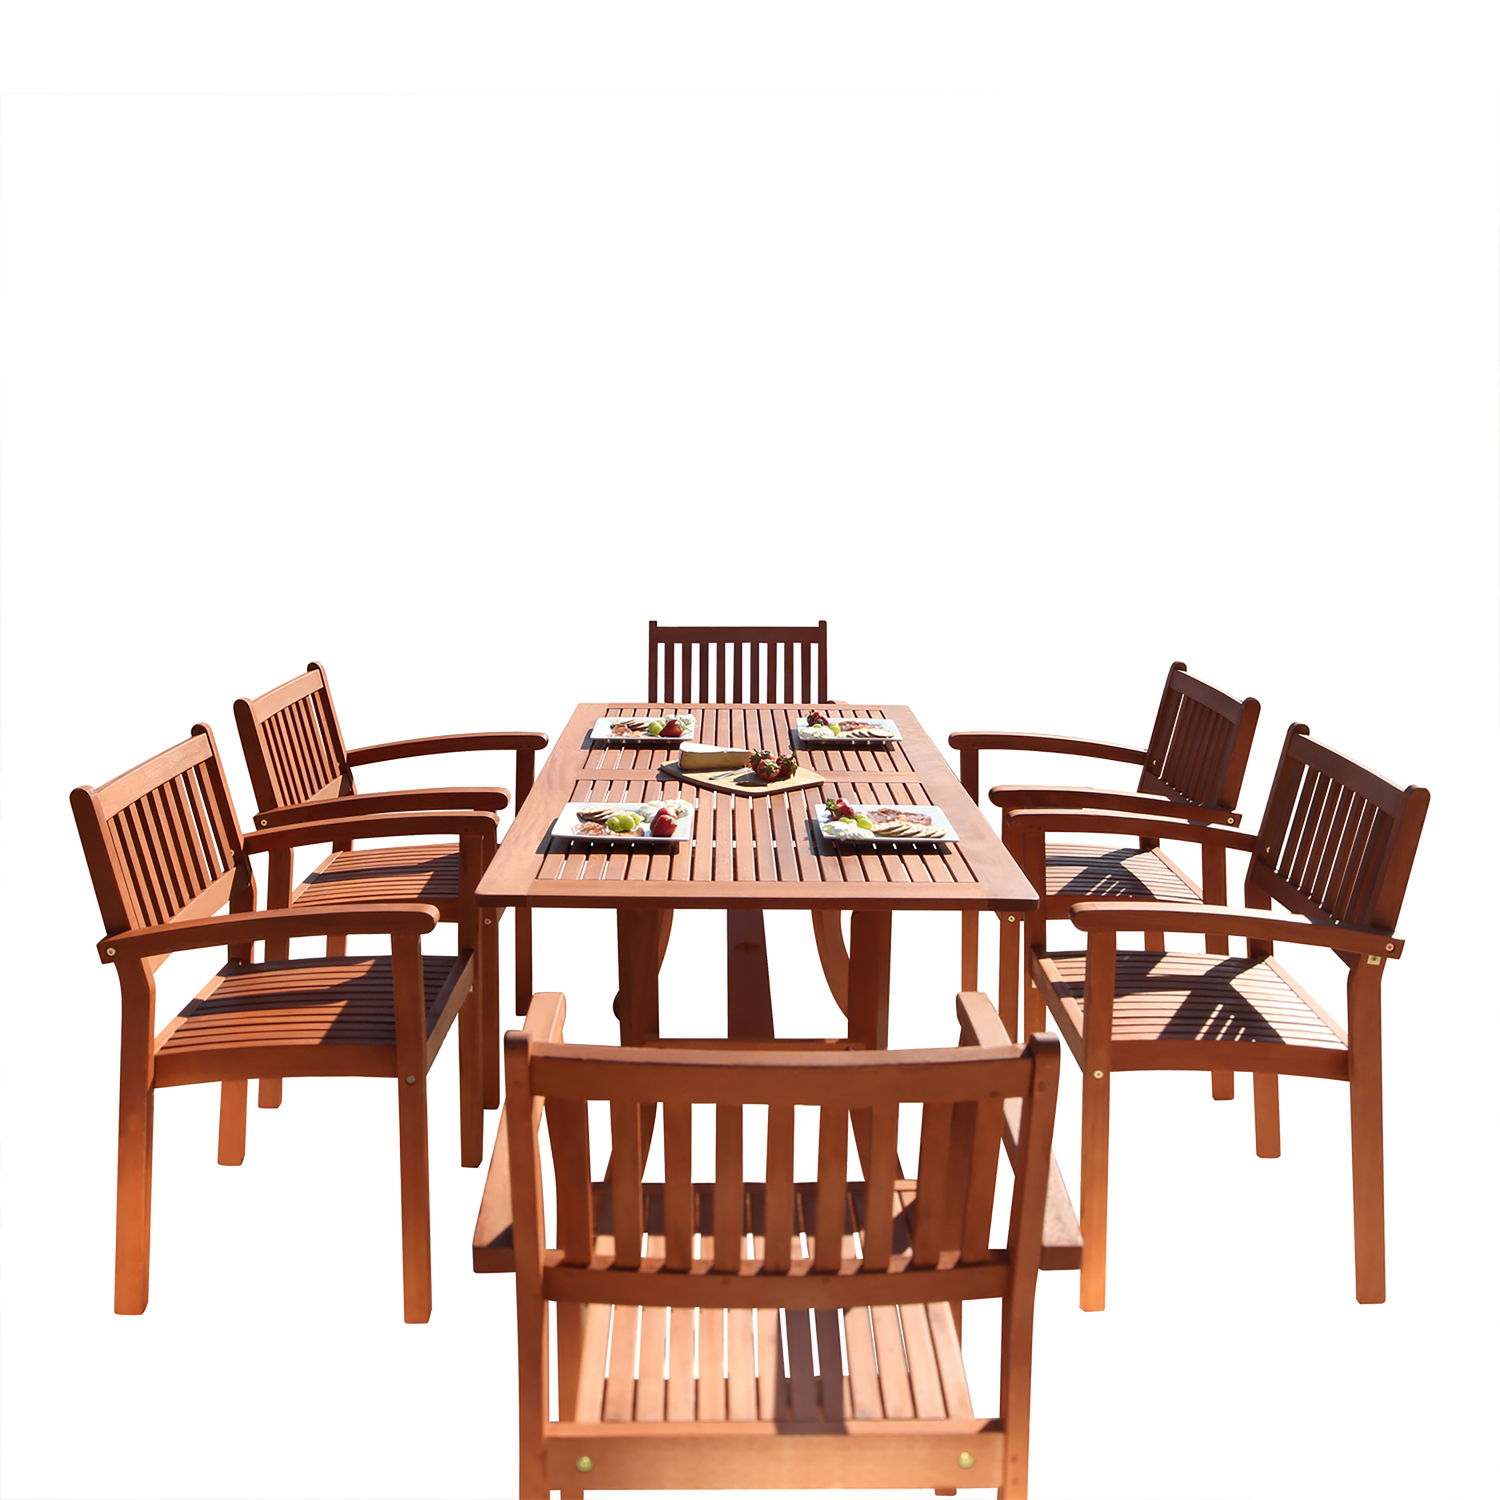 Malibu Outdoor 7-piece Wood Patio Dining Set with Stacking Chairs